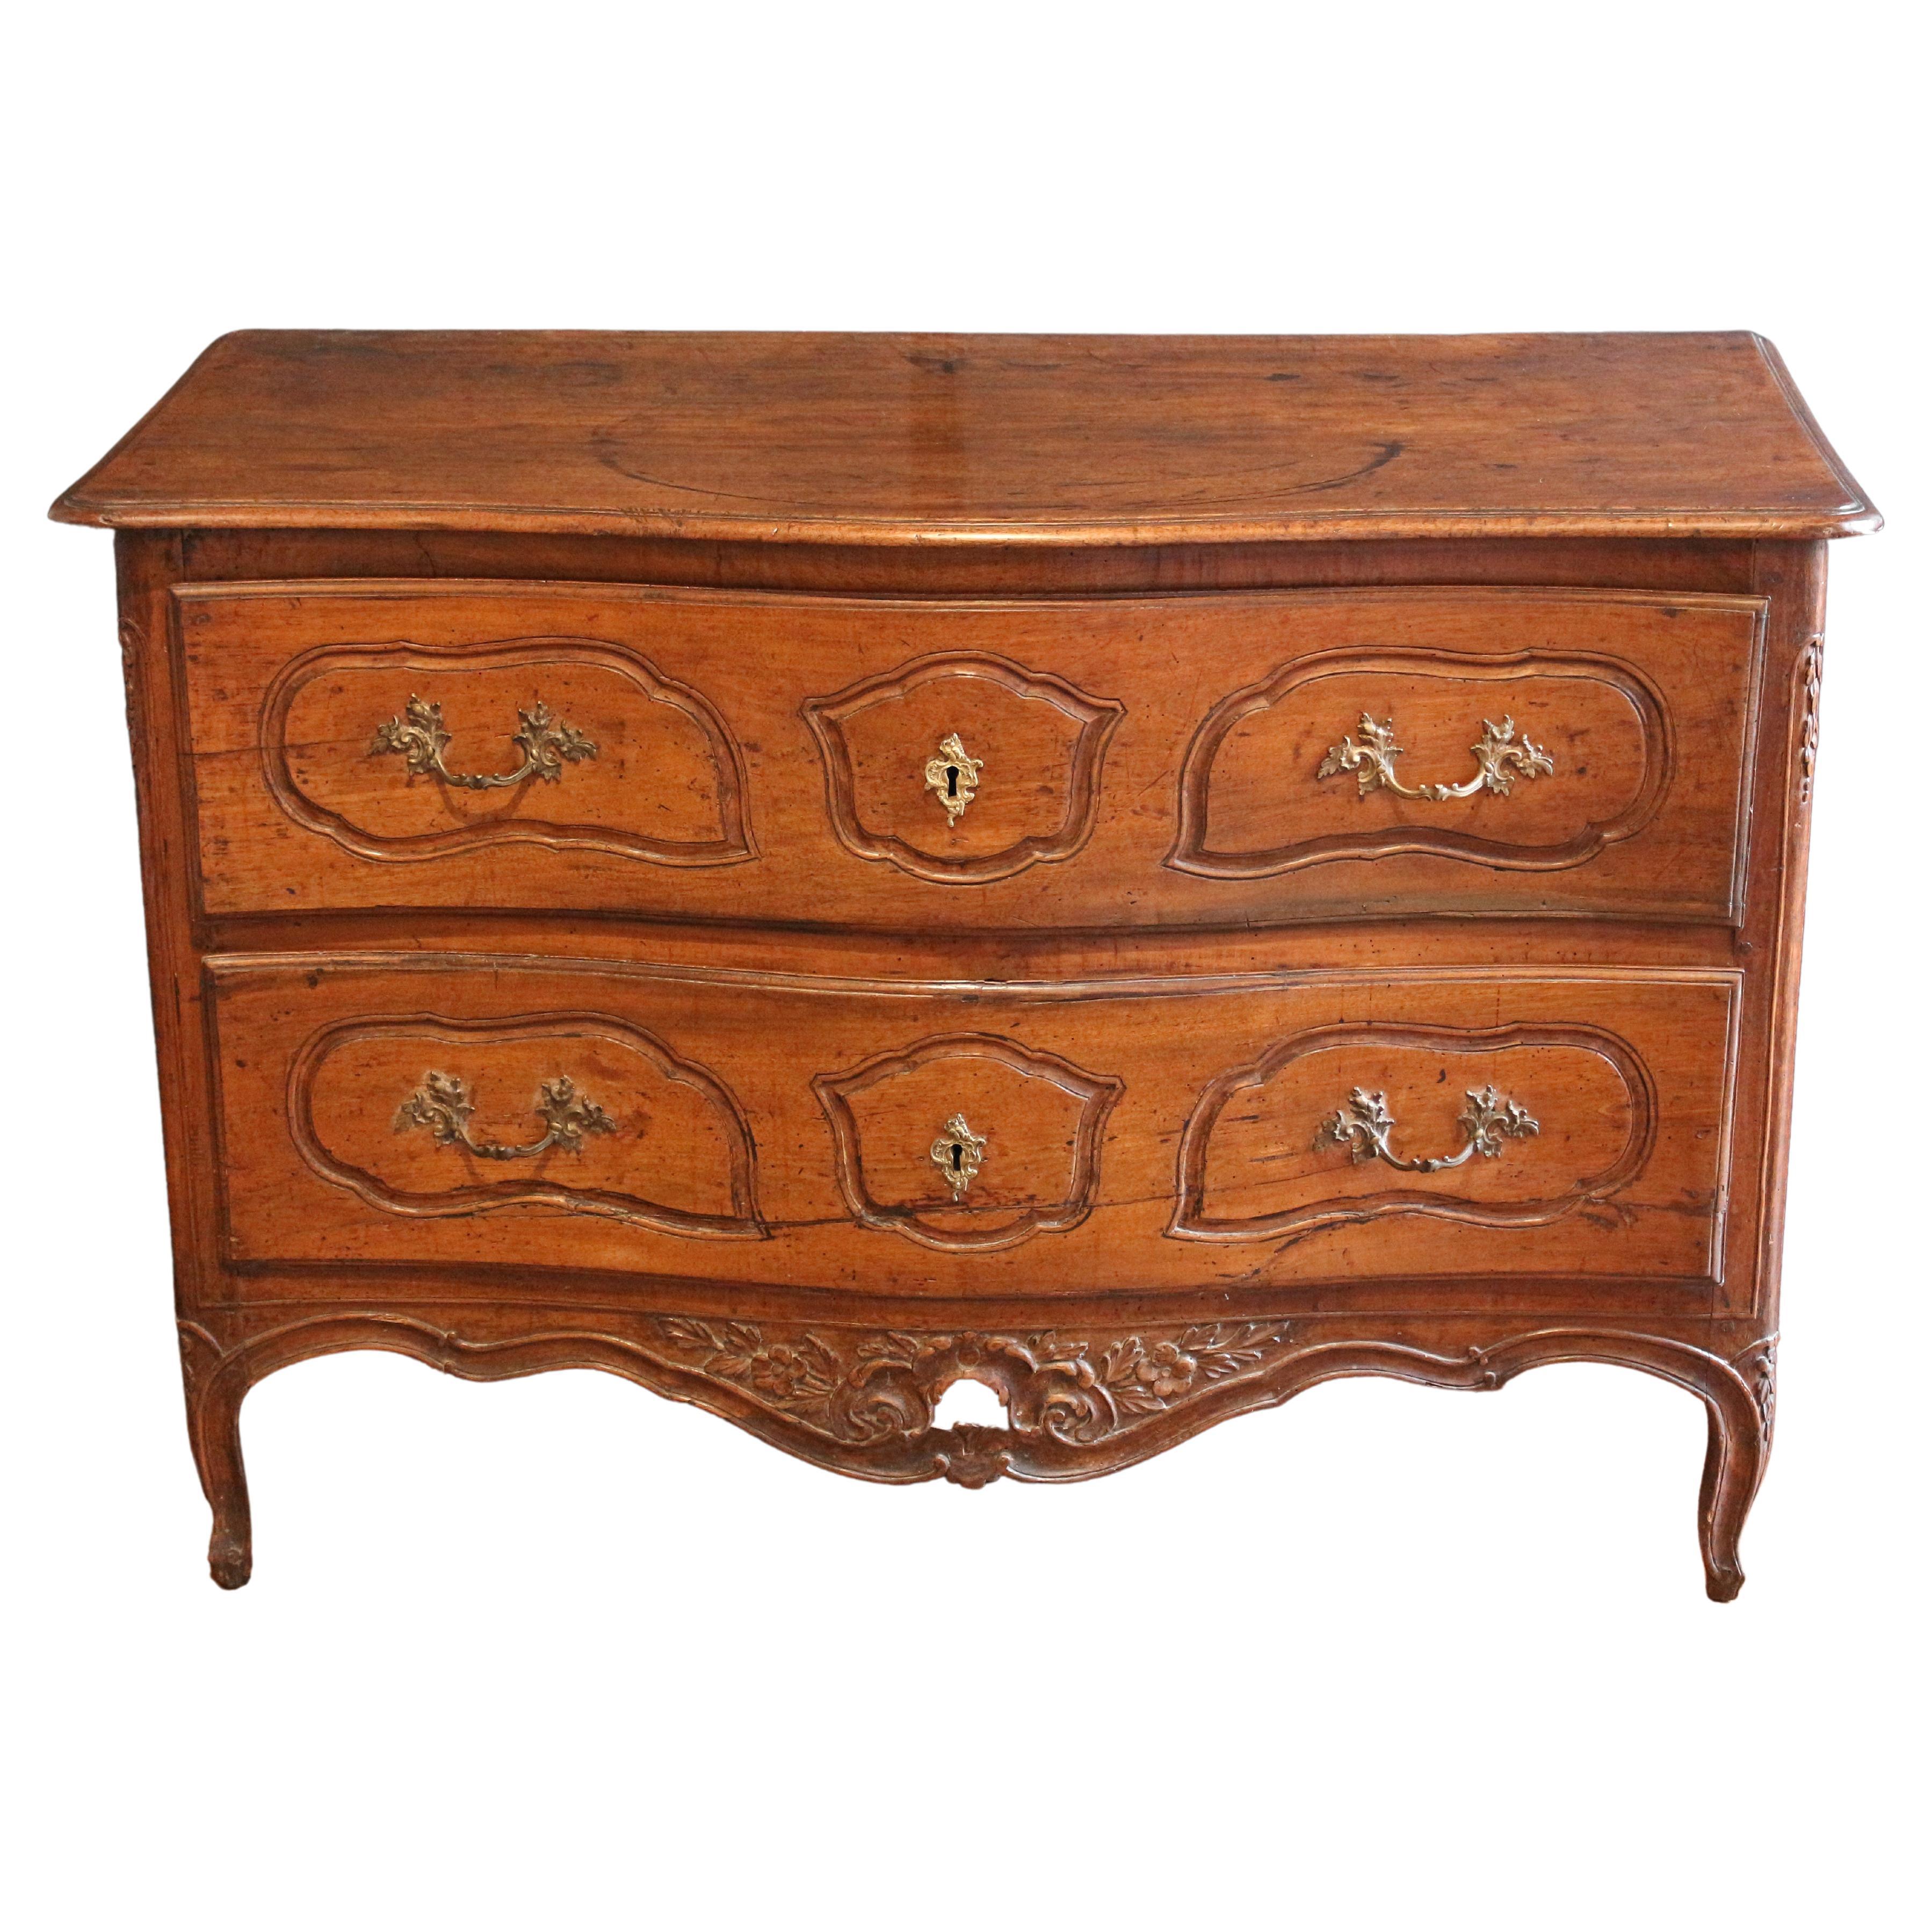 Circa 1735-55 French Rococo Period Commode from Provence For Sale